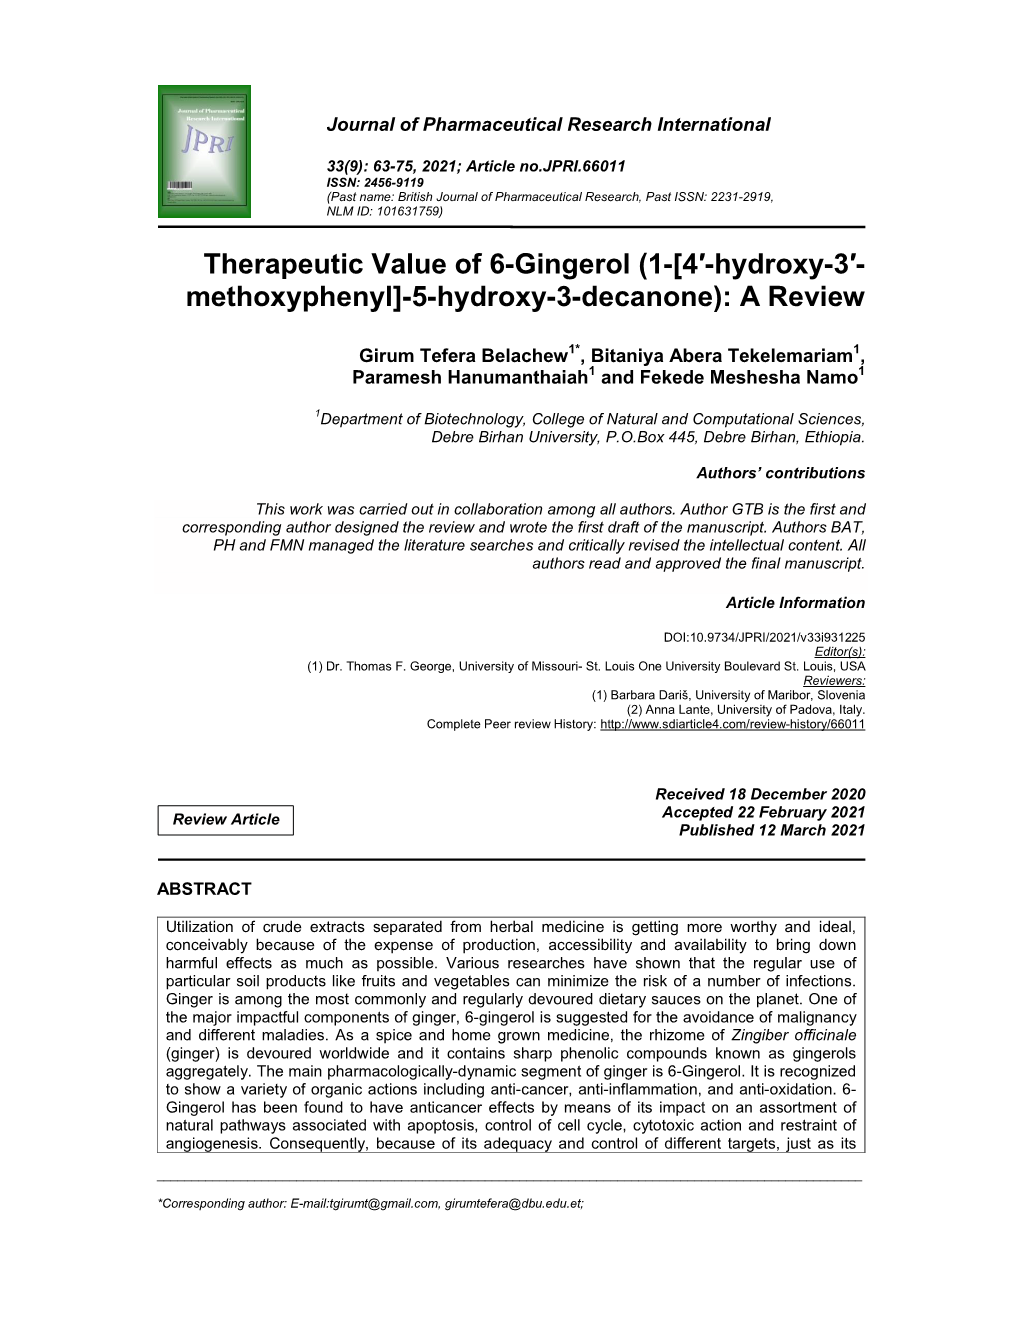 Therapeutic Value of 6-Gingerol (1-[4′-Hydroxy-3′- Methoxyphenyl]-5-Hydroxy-3-Decanone): a Review